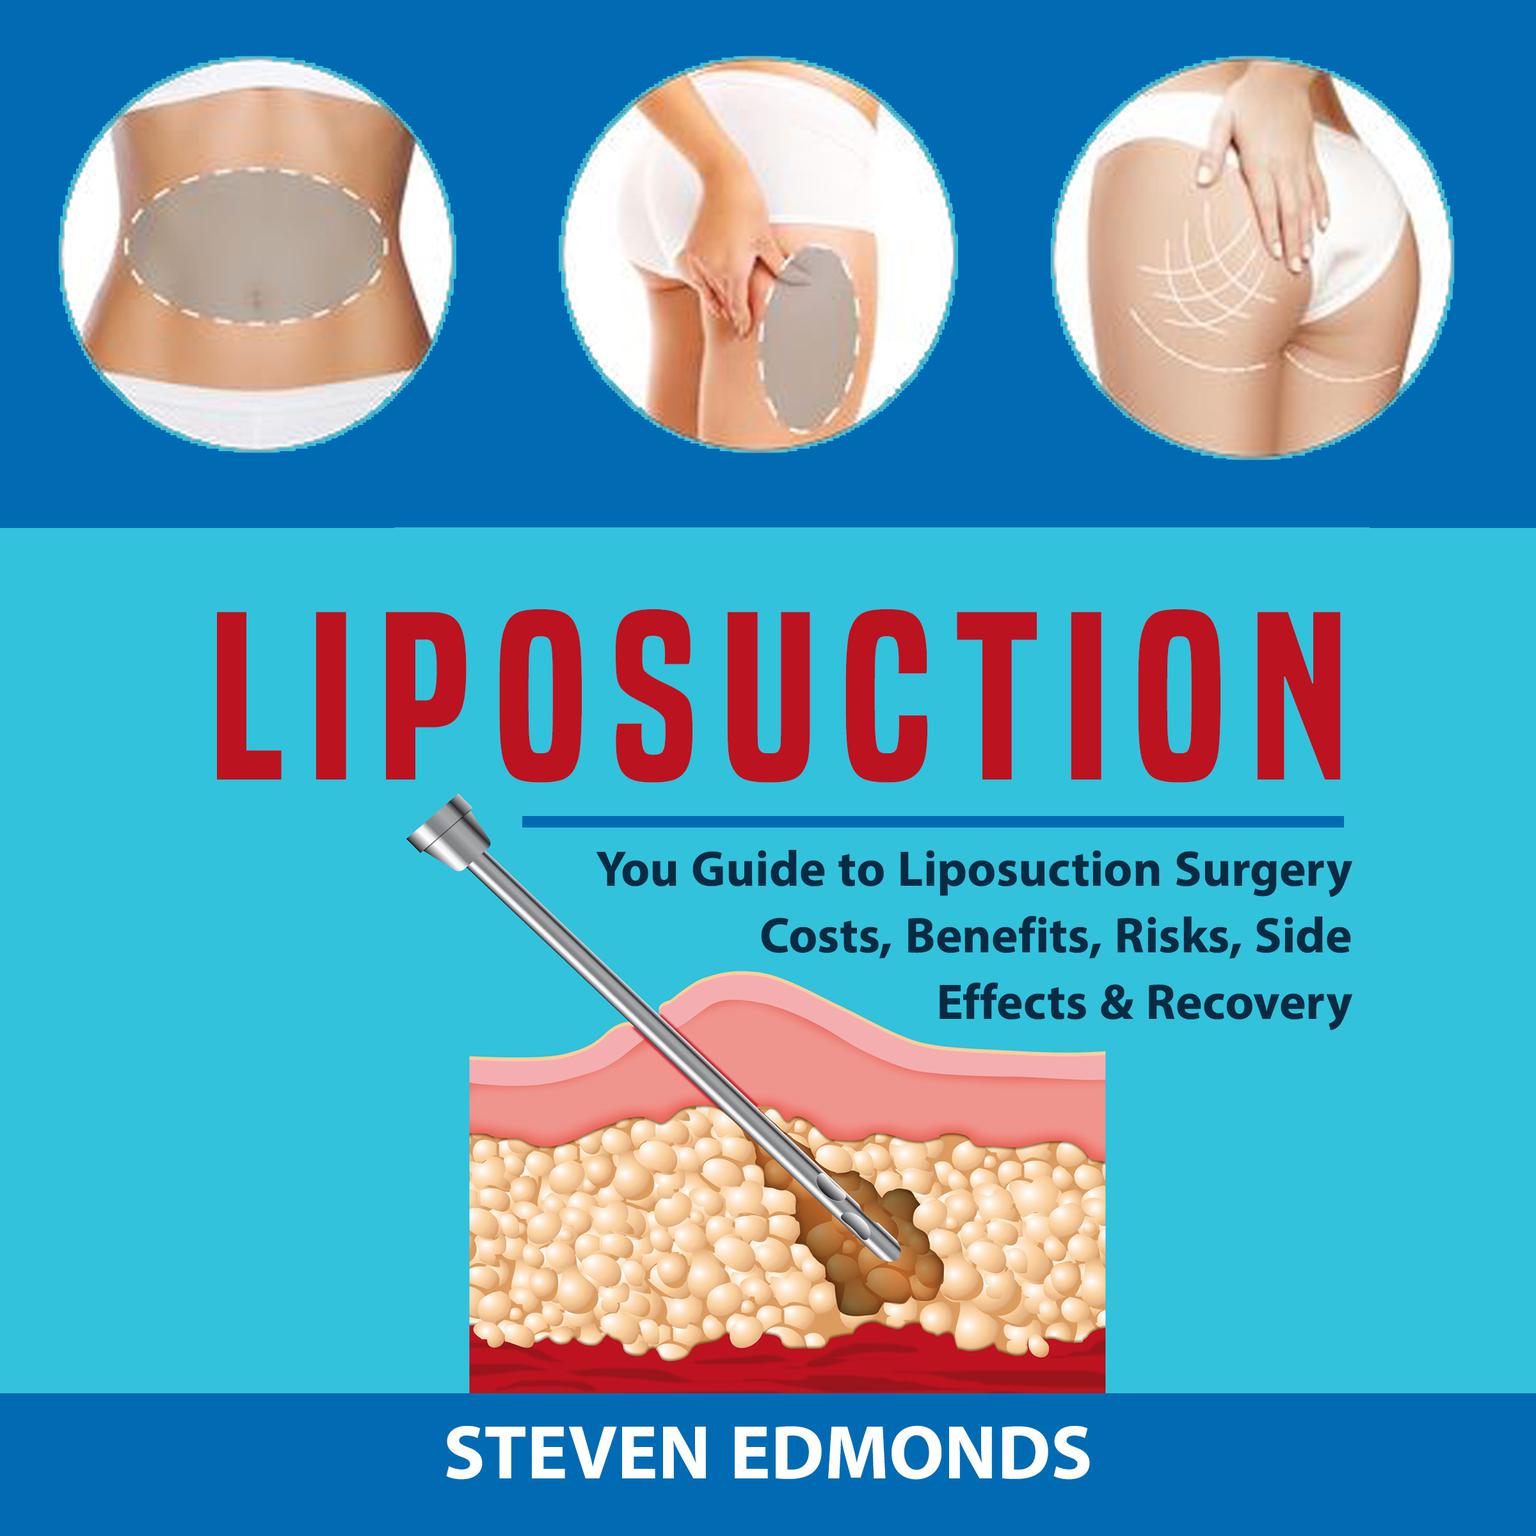 Liposuction: You Guide to Liposuction Surgery Costs, Benefits, Risks, Side Effects & Recovery Audiobook, by Steven Edmonds